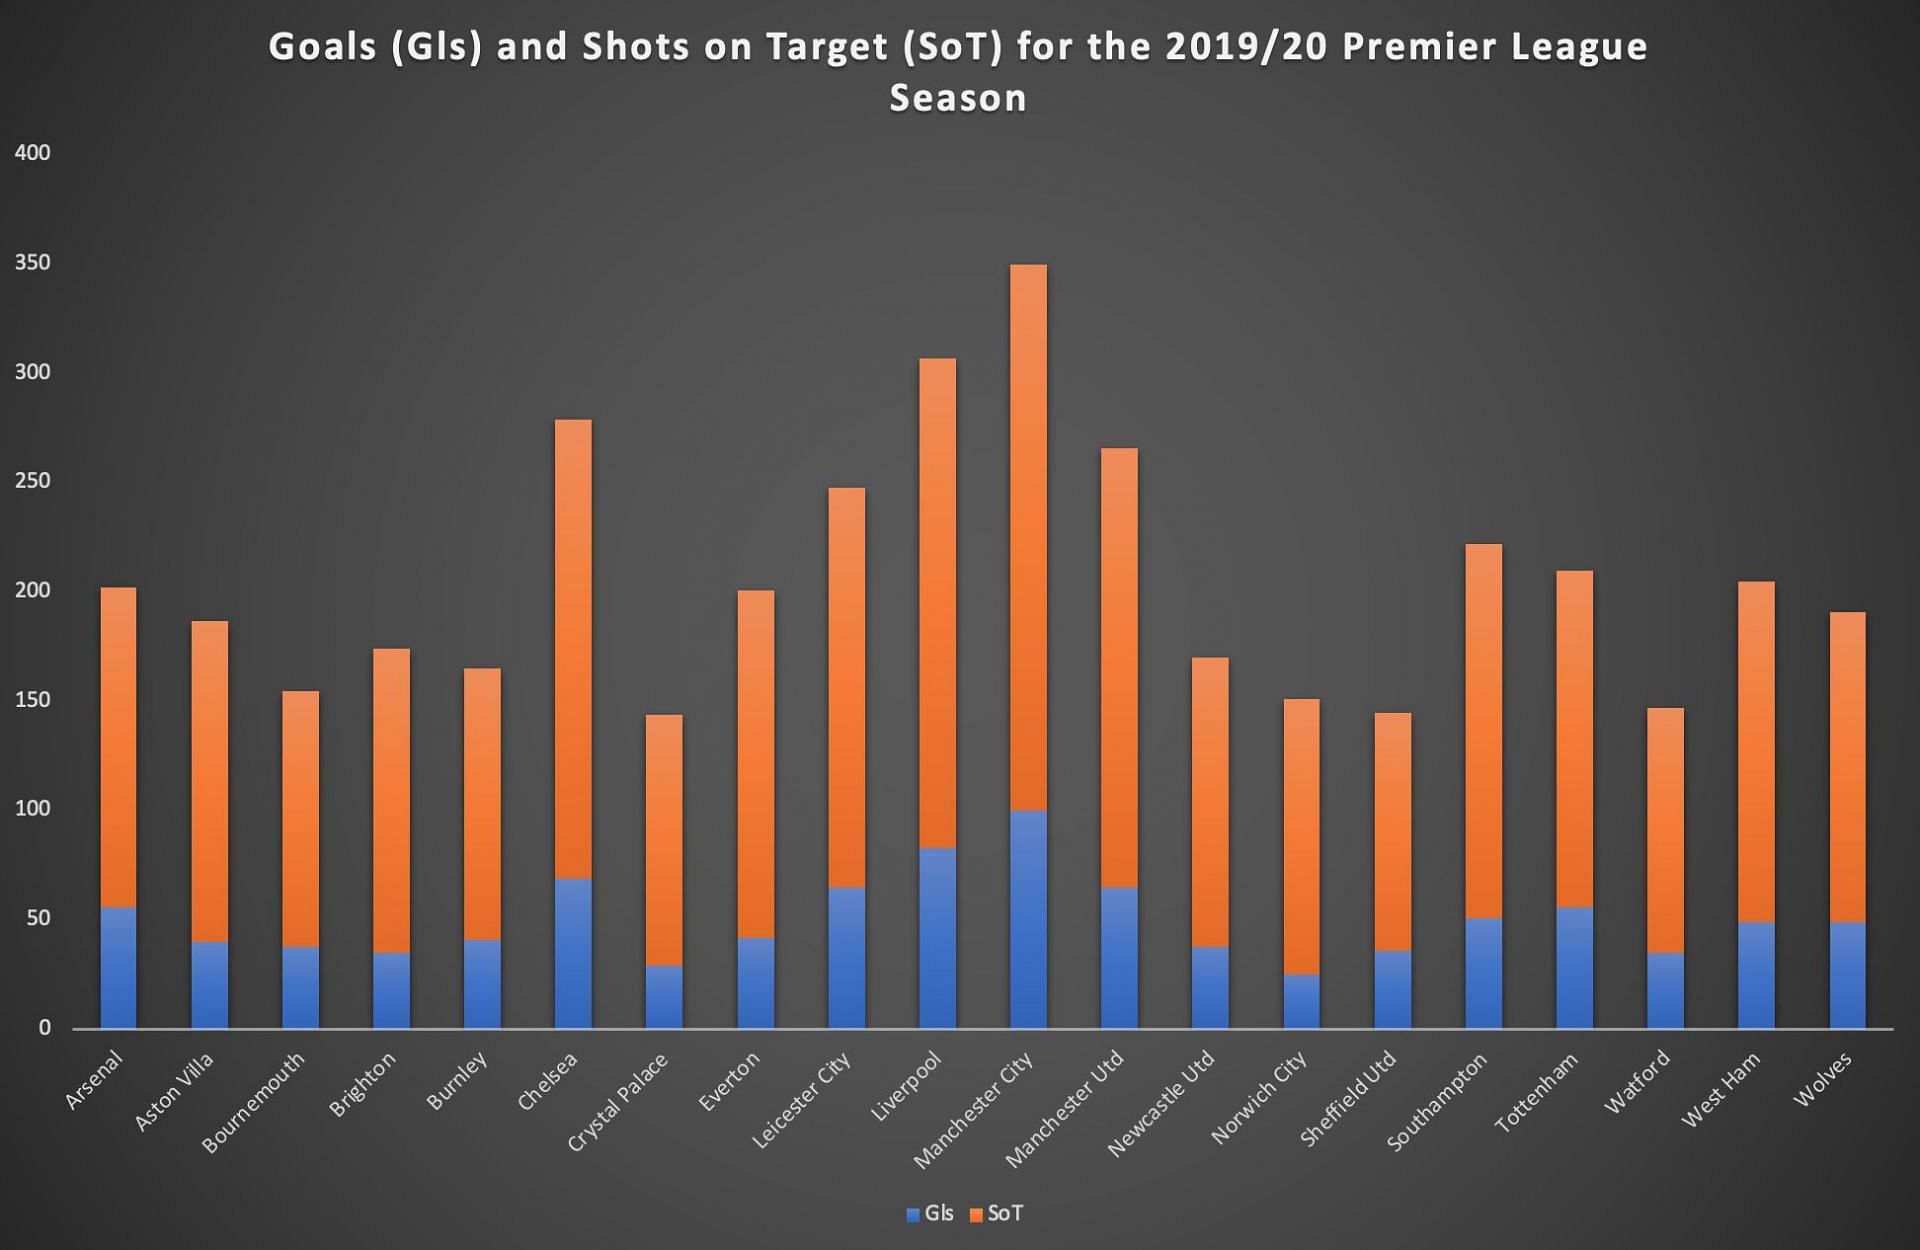 Despite falling behind Manchester City in the goal-scoring charts during the 2019/20 season, Liverpool&#039;s collective structure enabled the team to conquer English football.